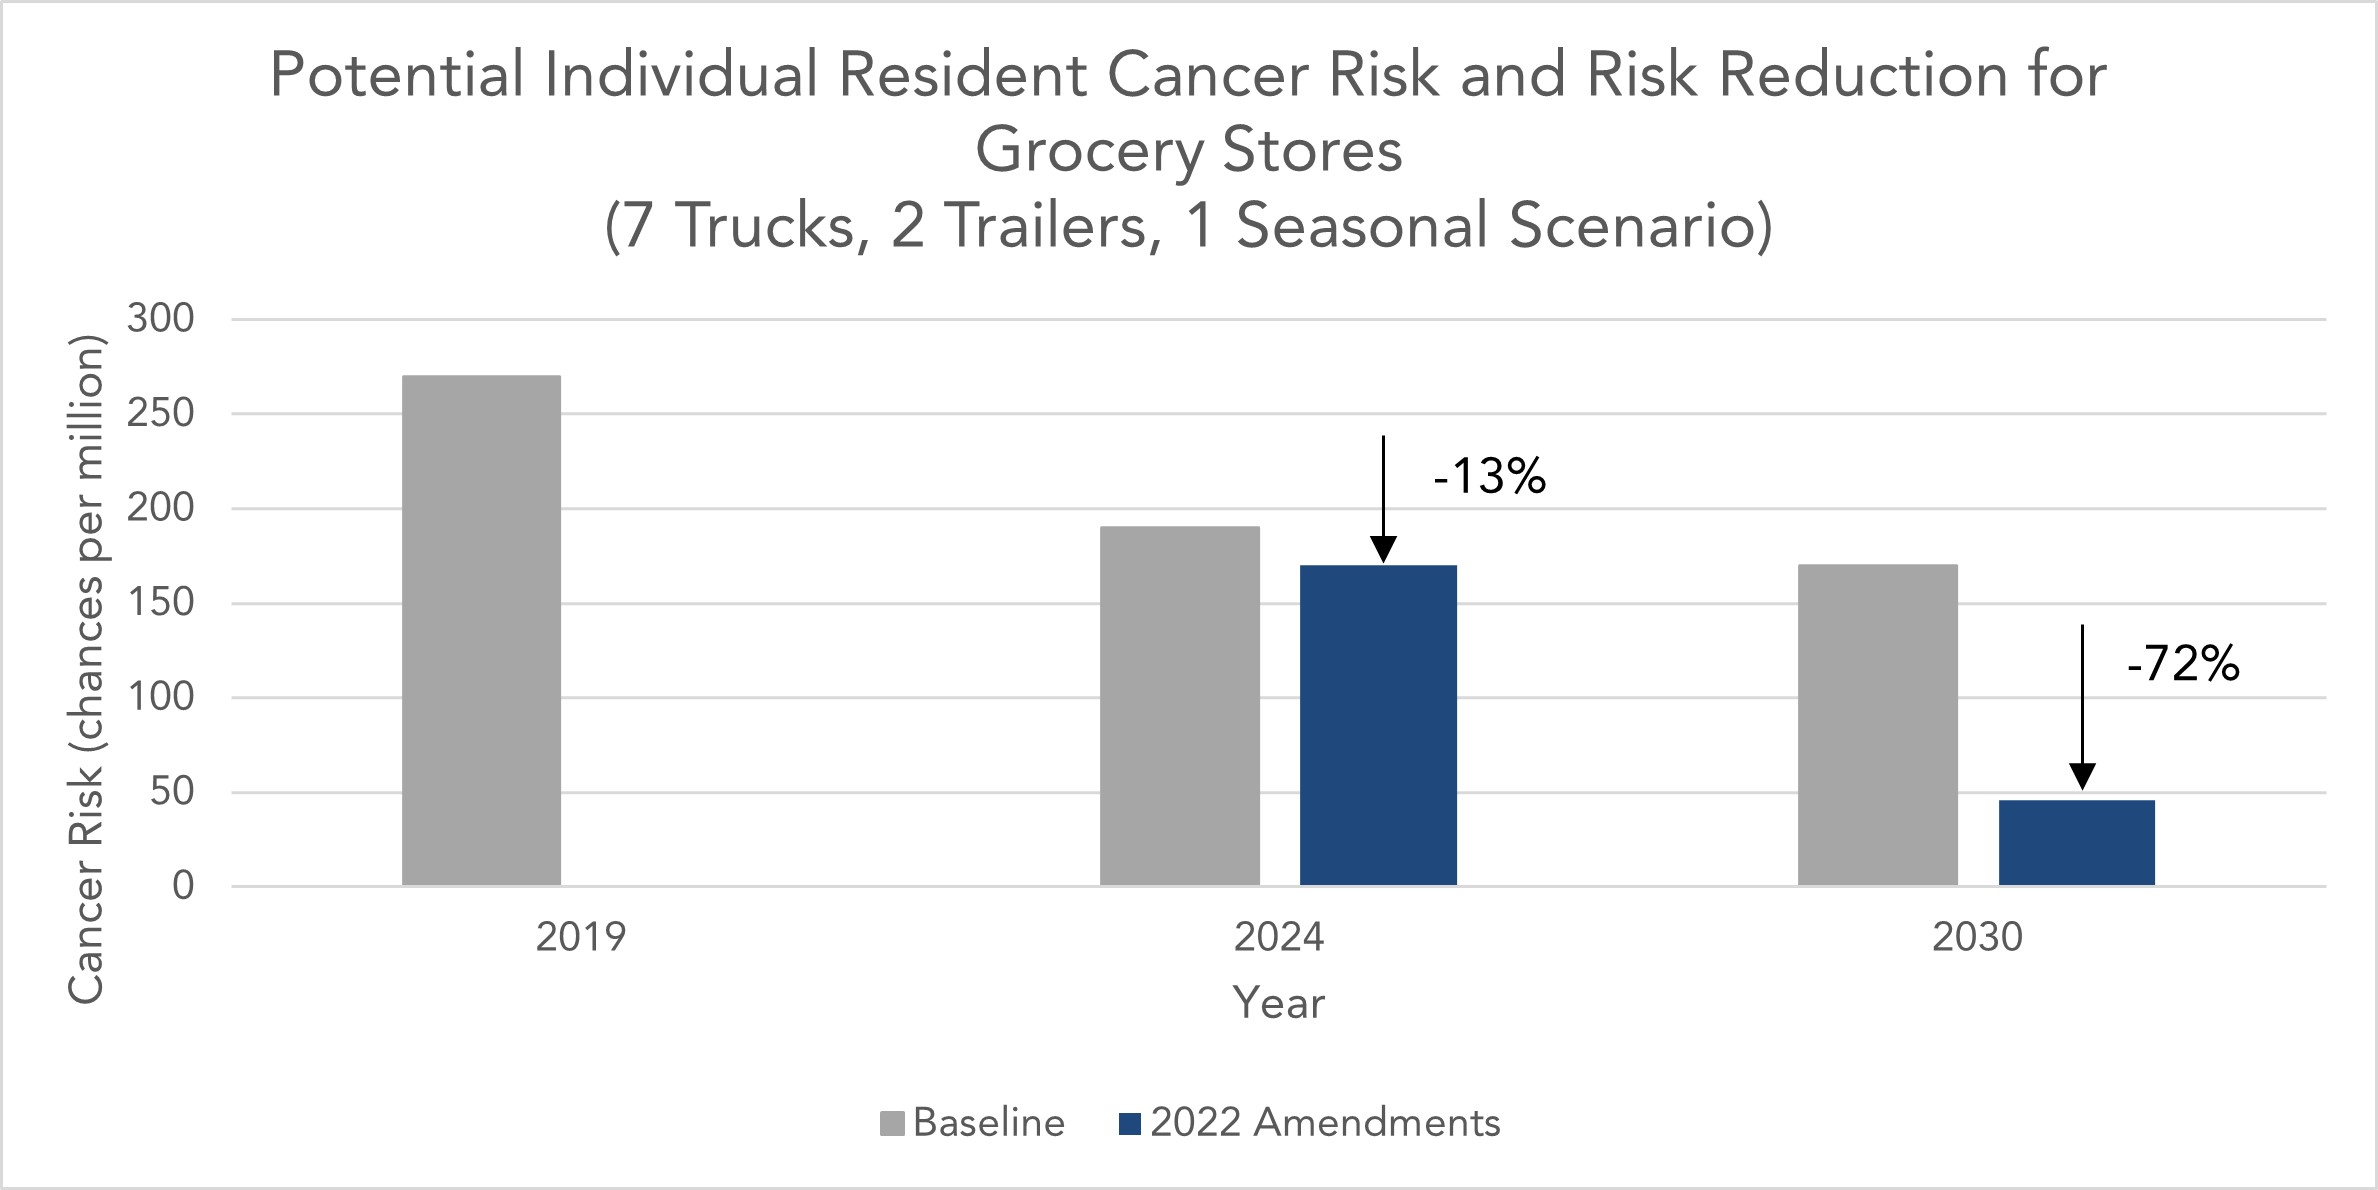 Graph showing potential individual resident cancer risk and risk reduction for grocery stores (7 trucks, 2 trailers, 1 seasonal scenario)